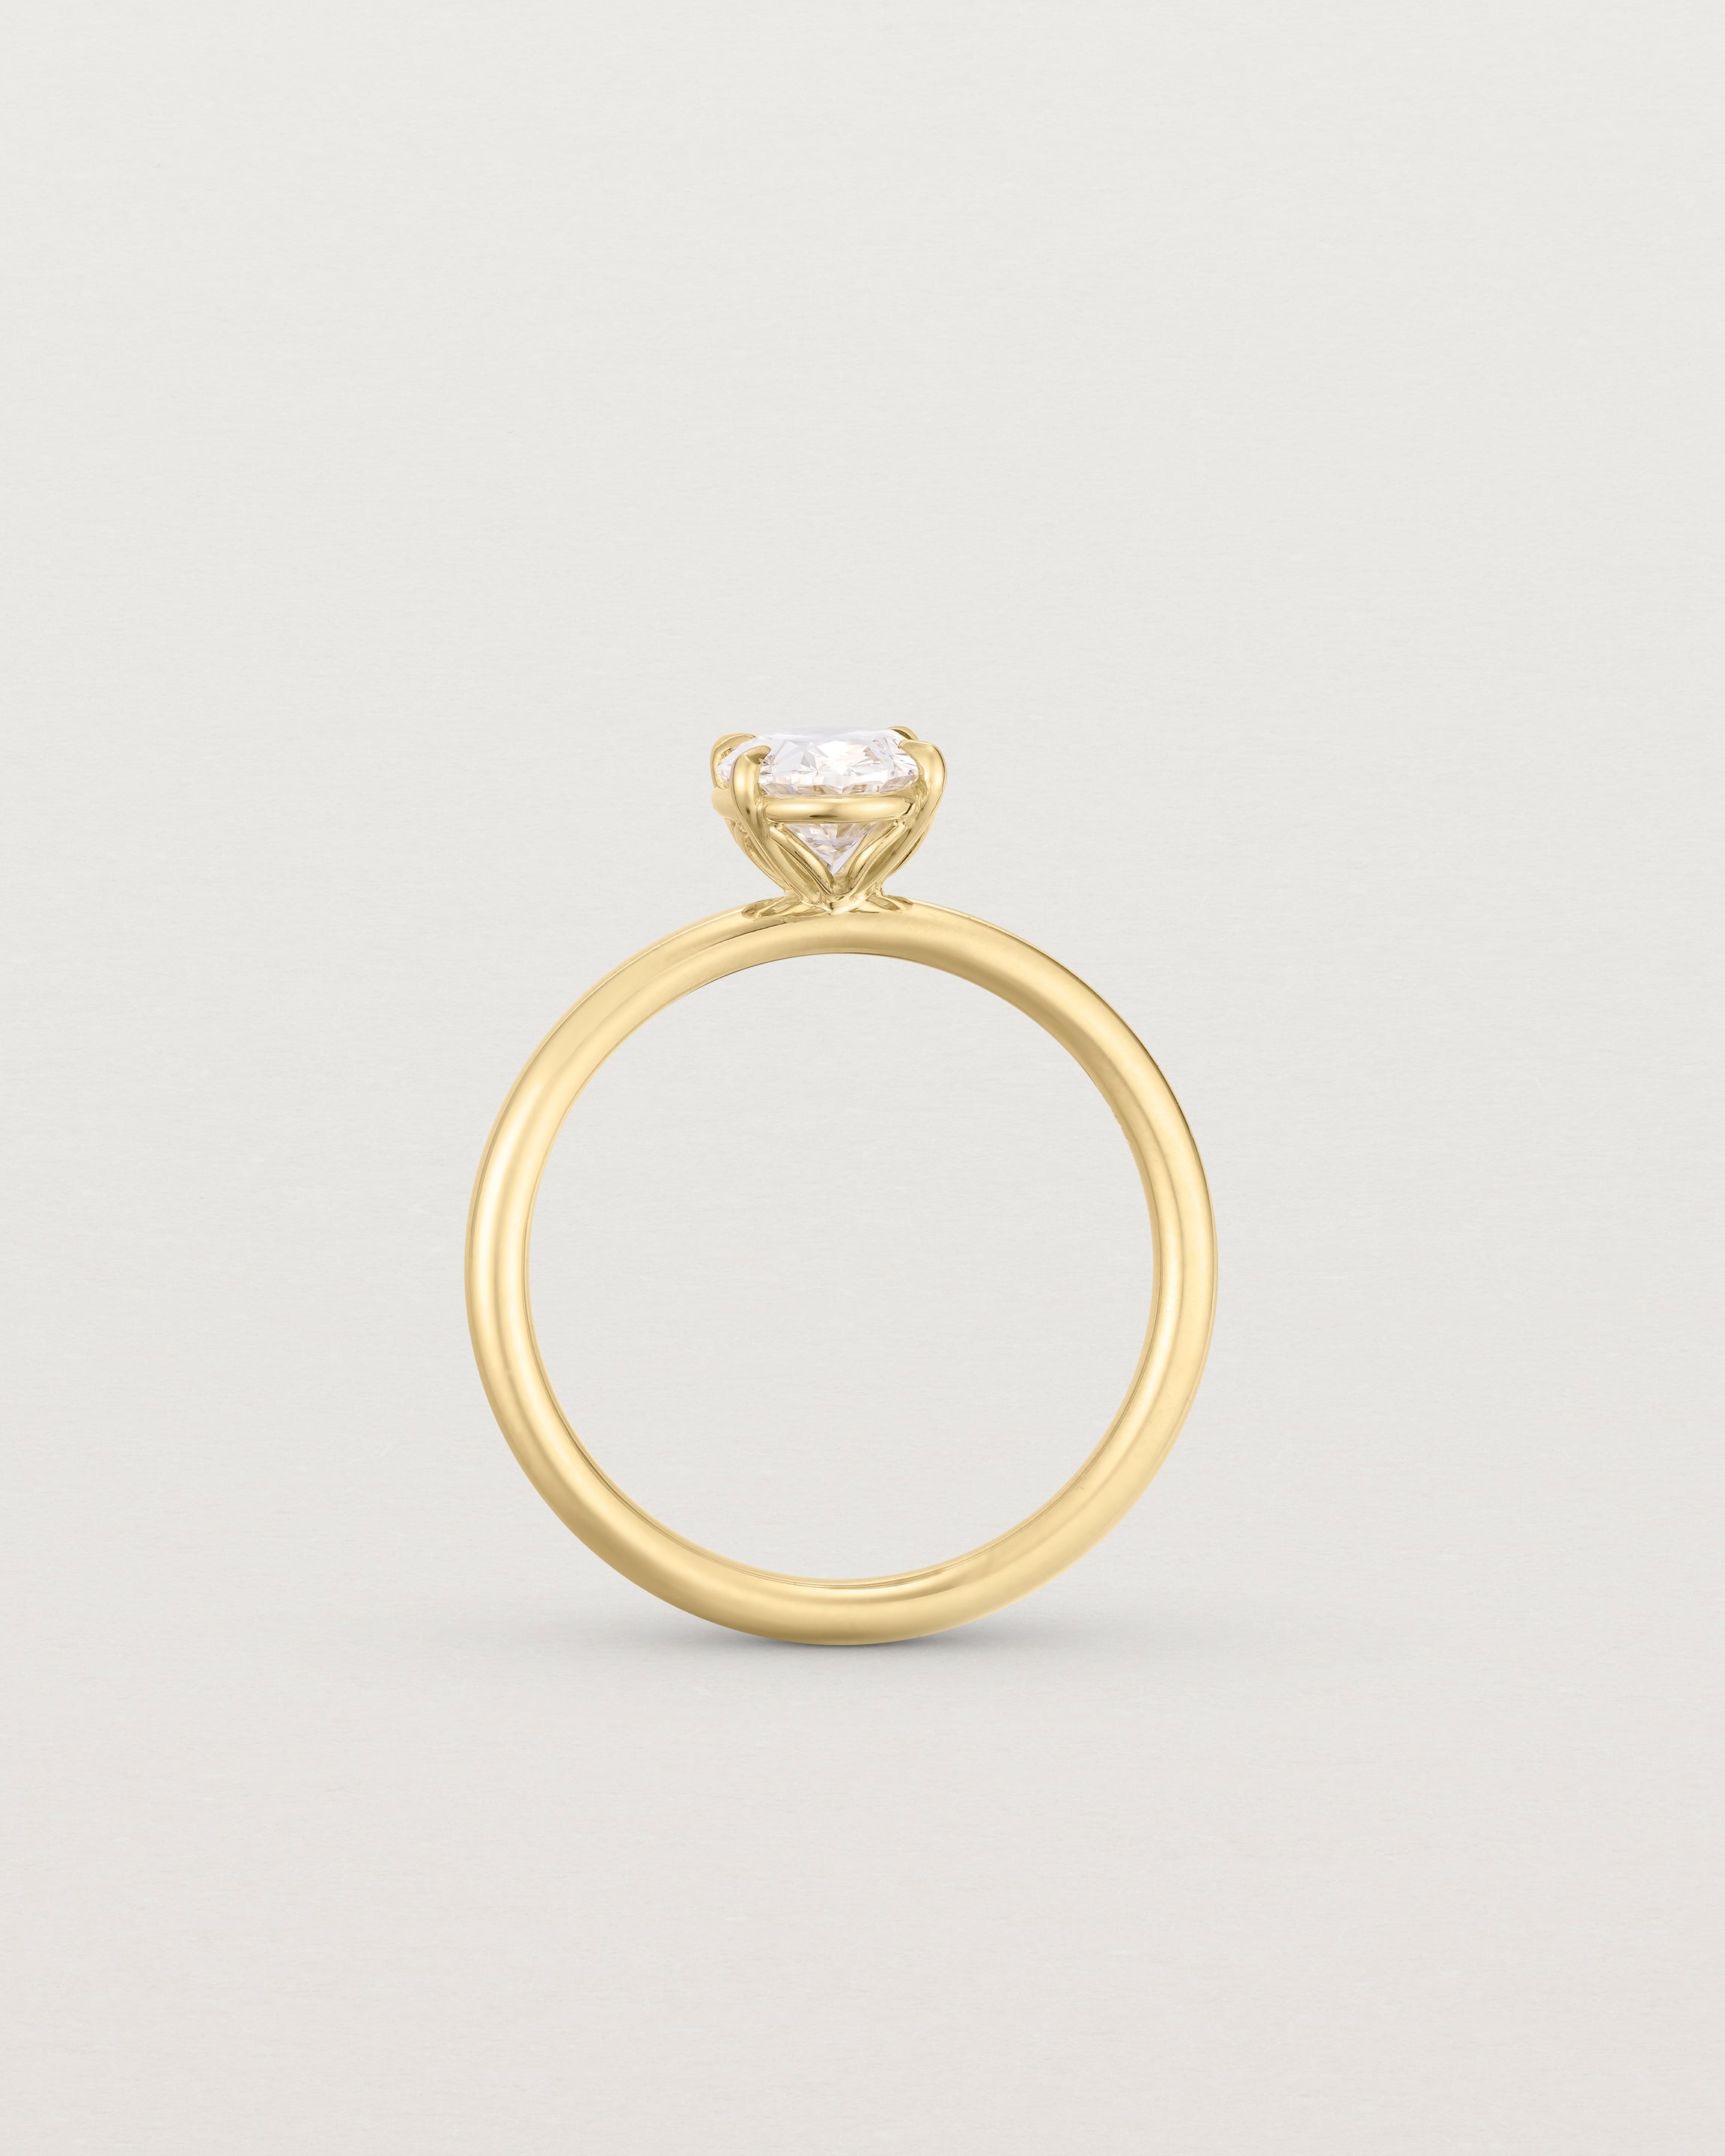 Standing view of the No. 112 Signature Solitaire | Laboratory Grown Diamond in yellow gold.